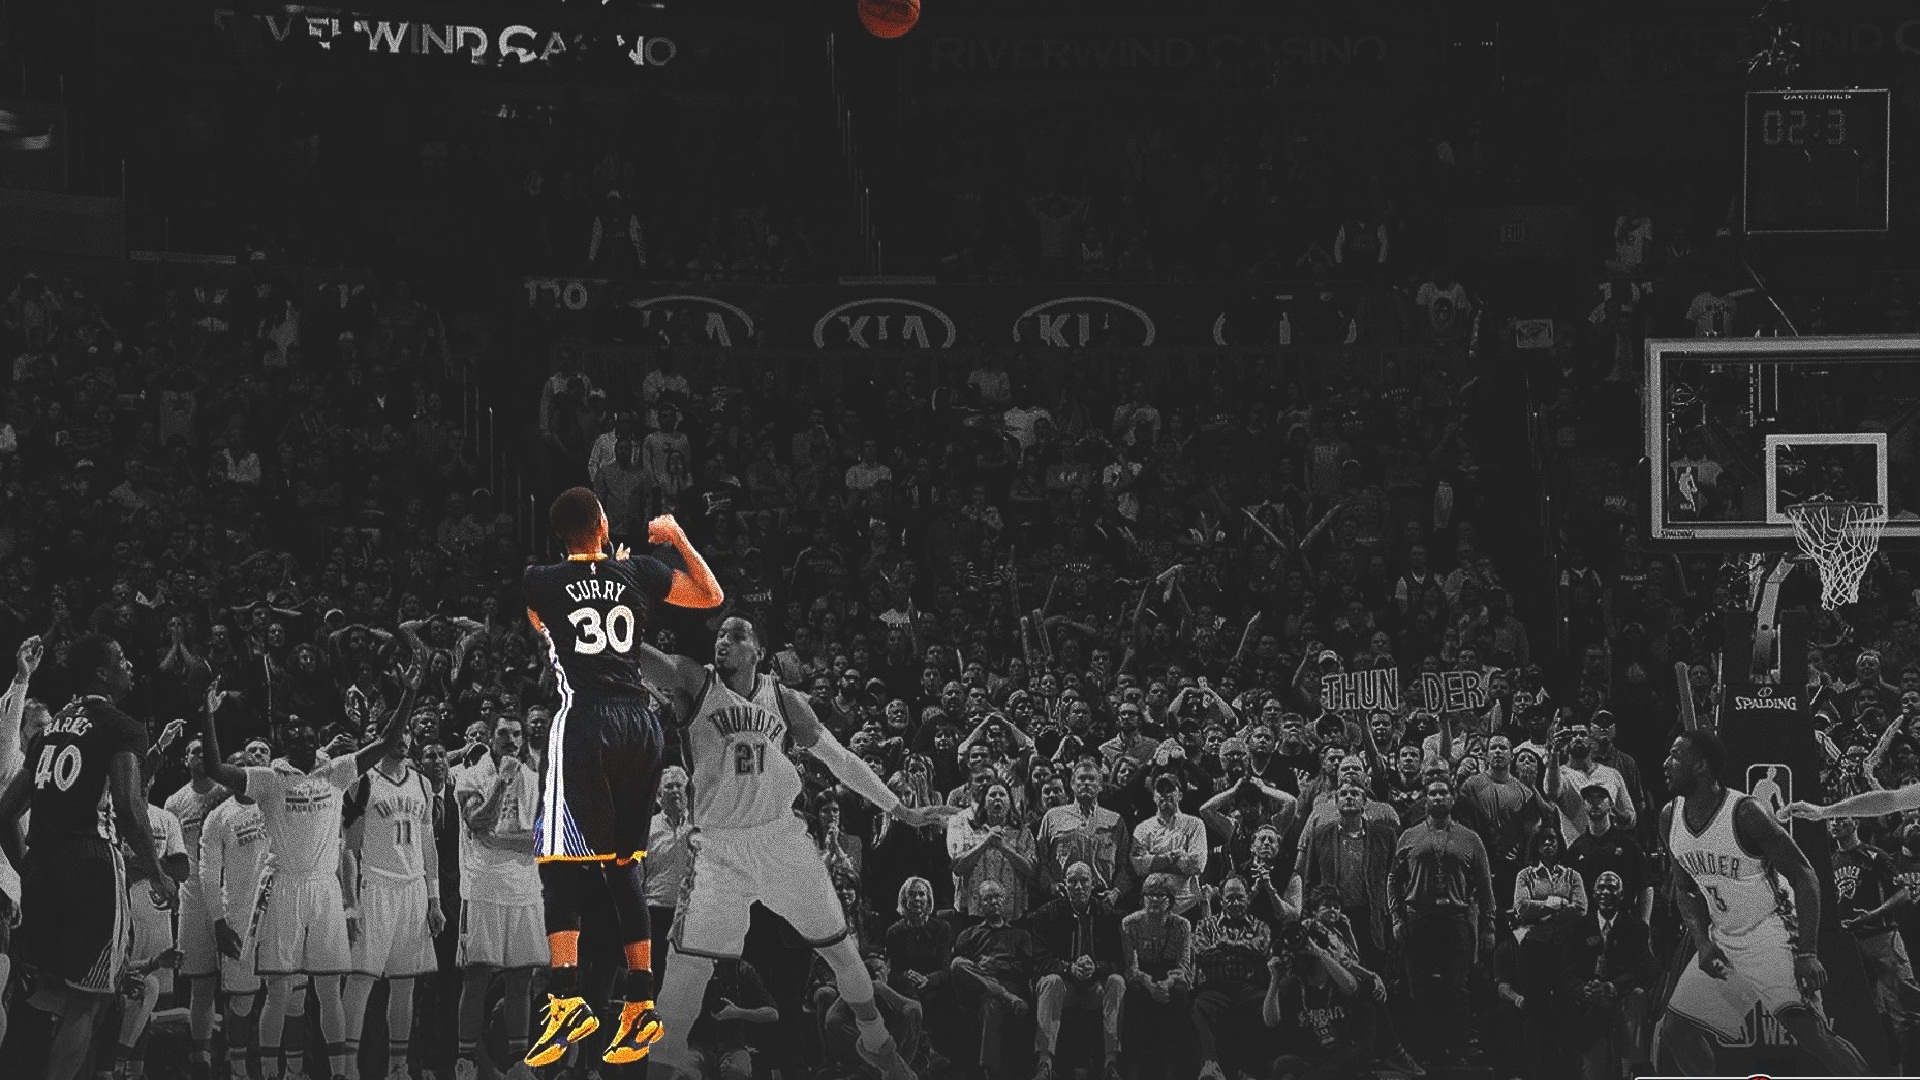 nba wallpaper hd for android,crowd,fan,sport venue,audience,basketball